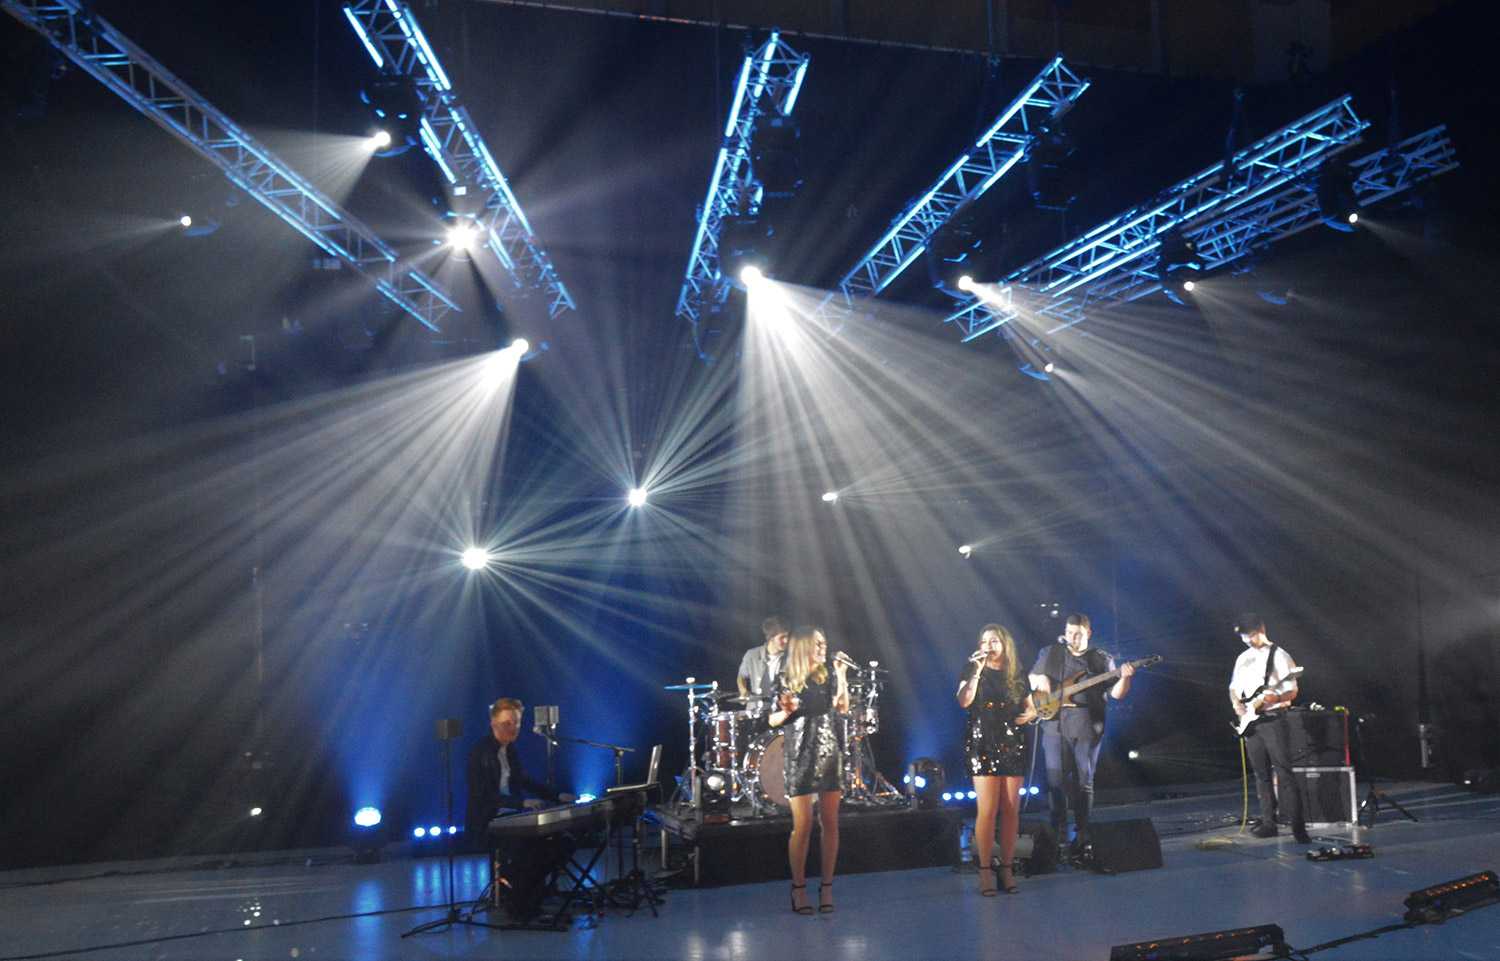 The Haus Band were filmed at The Wales Millennium Centre